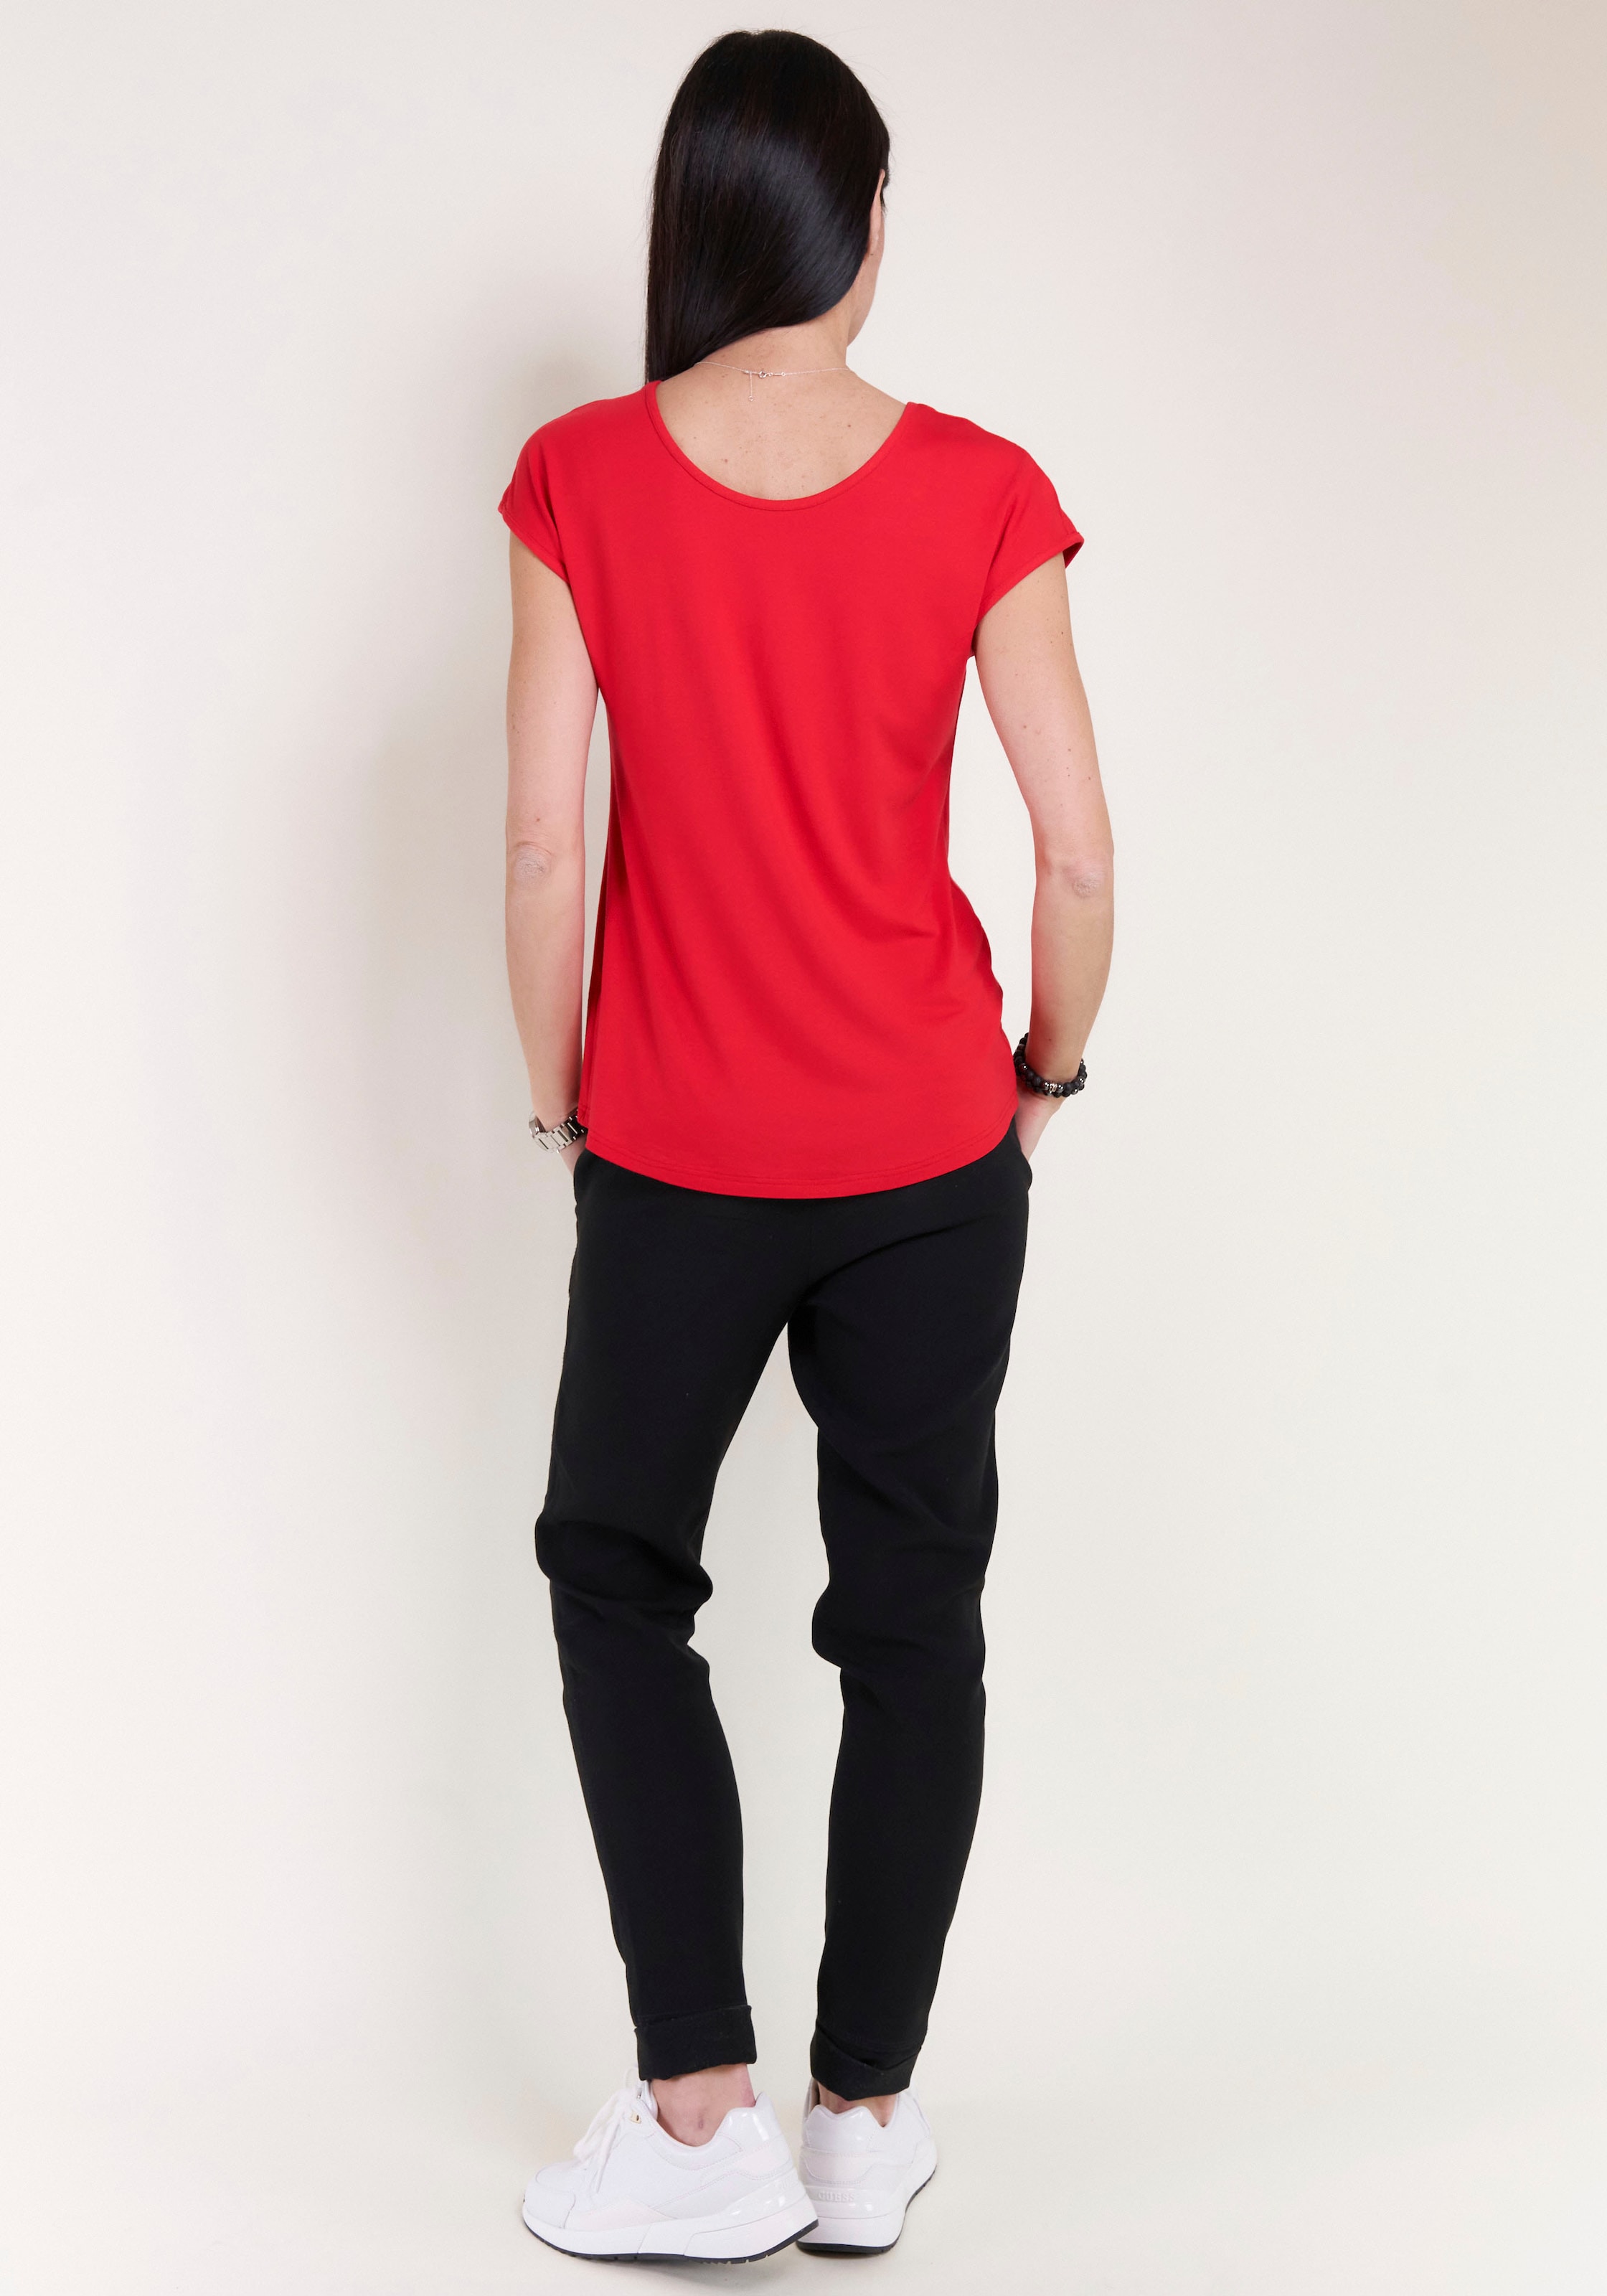 Seidel Moden YOU | in Red ABOUT Shirt